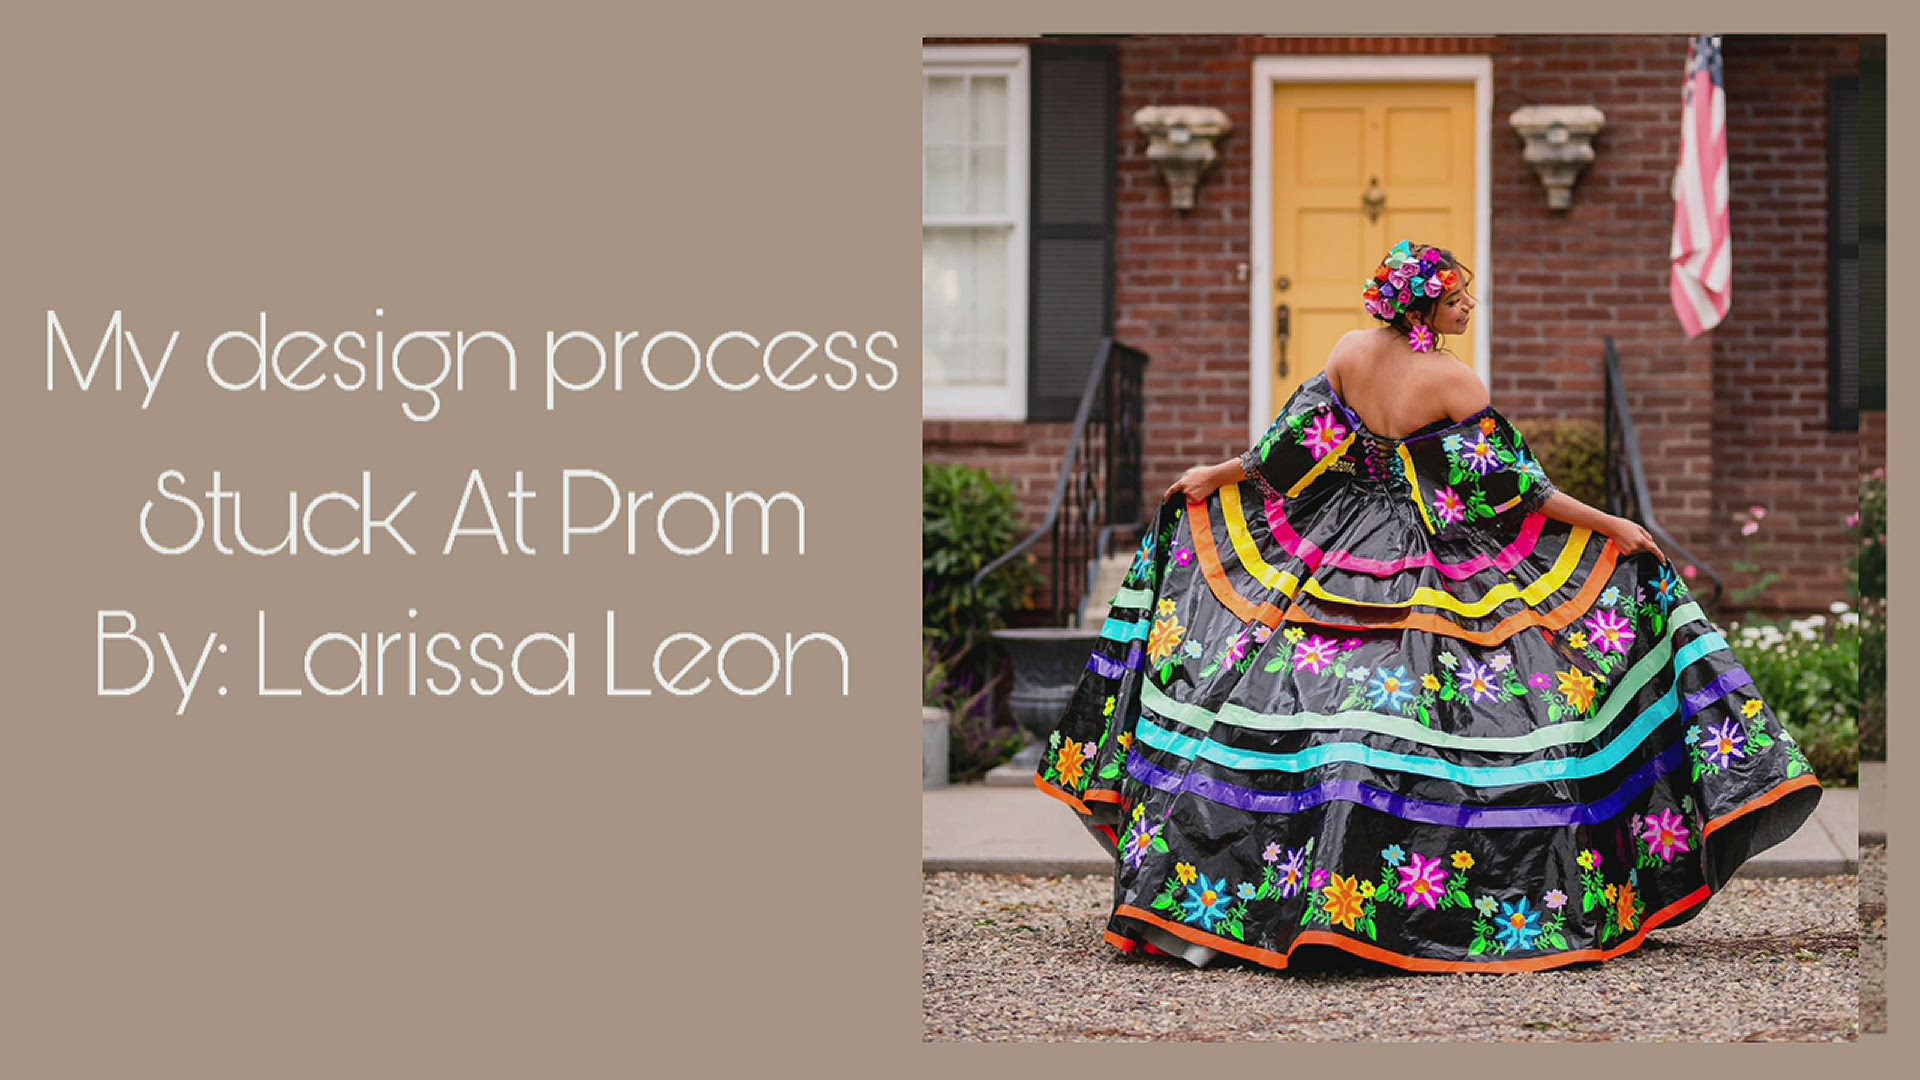 The Houston-born teen now lives in Washington, but her inspiration for her creative duct tape dress comes from Texas and her Mexican heritage.